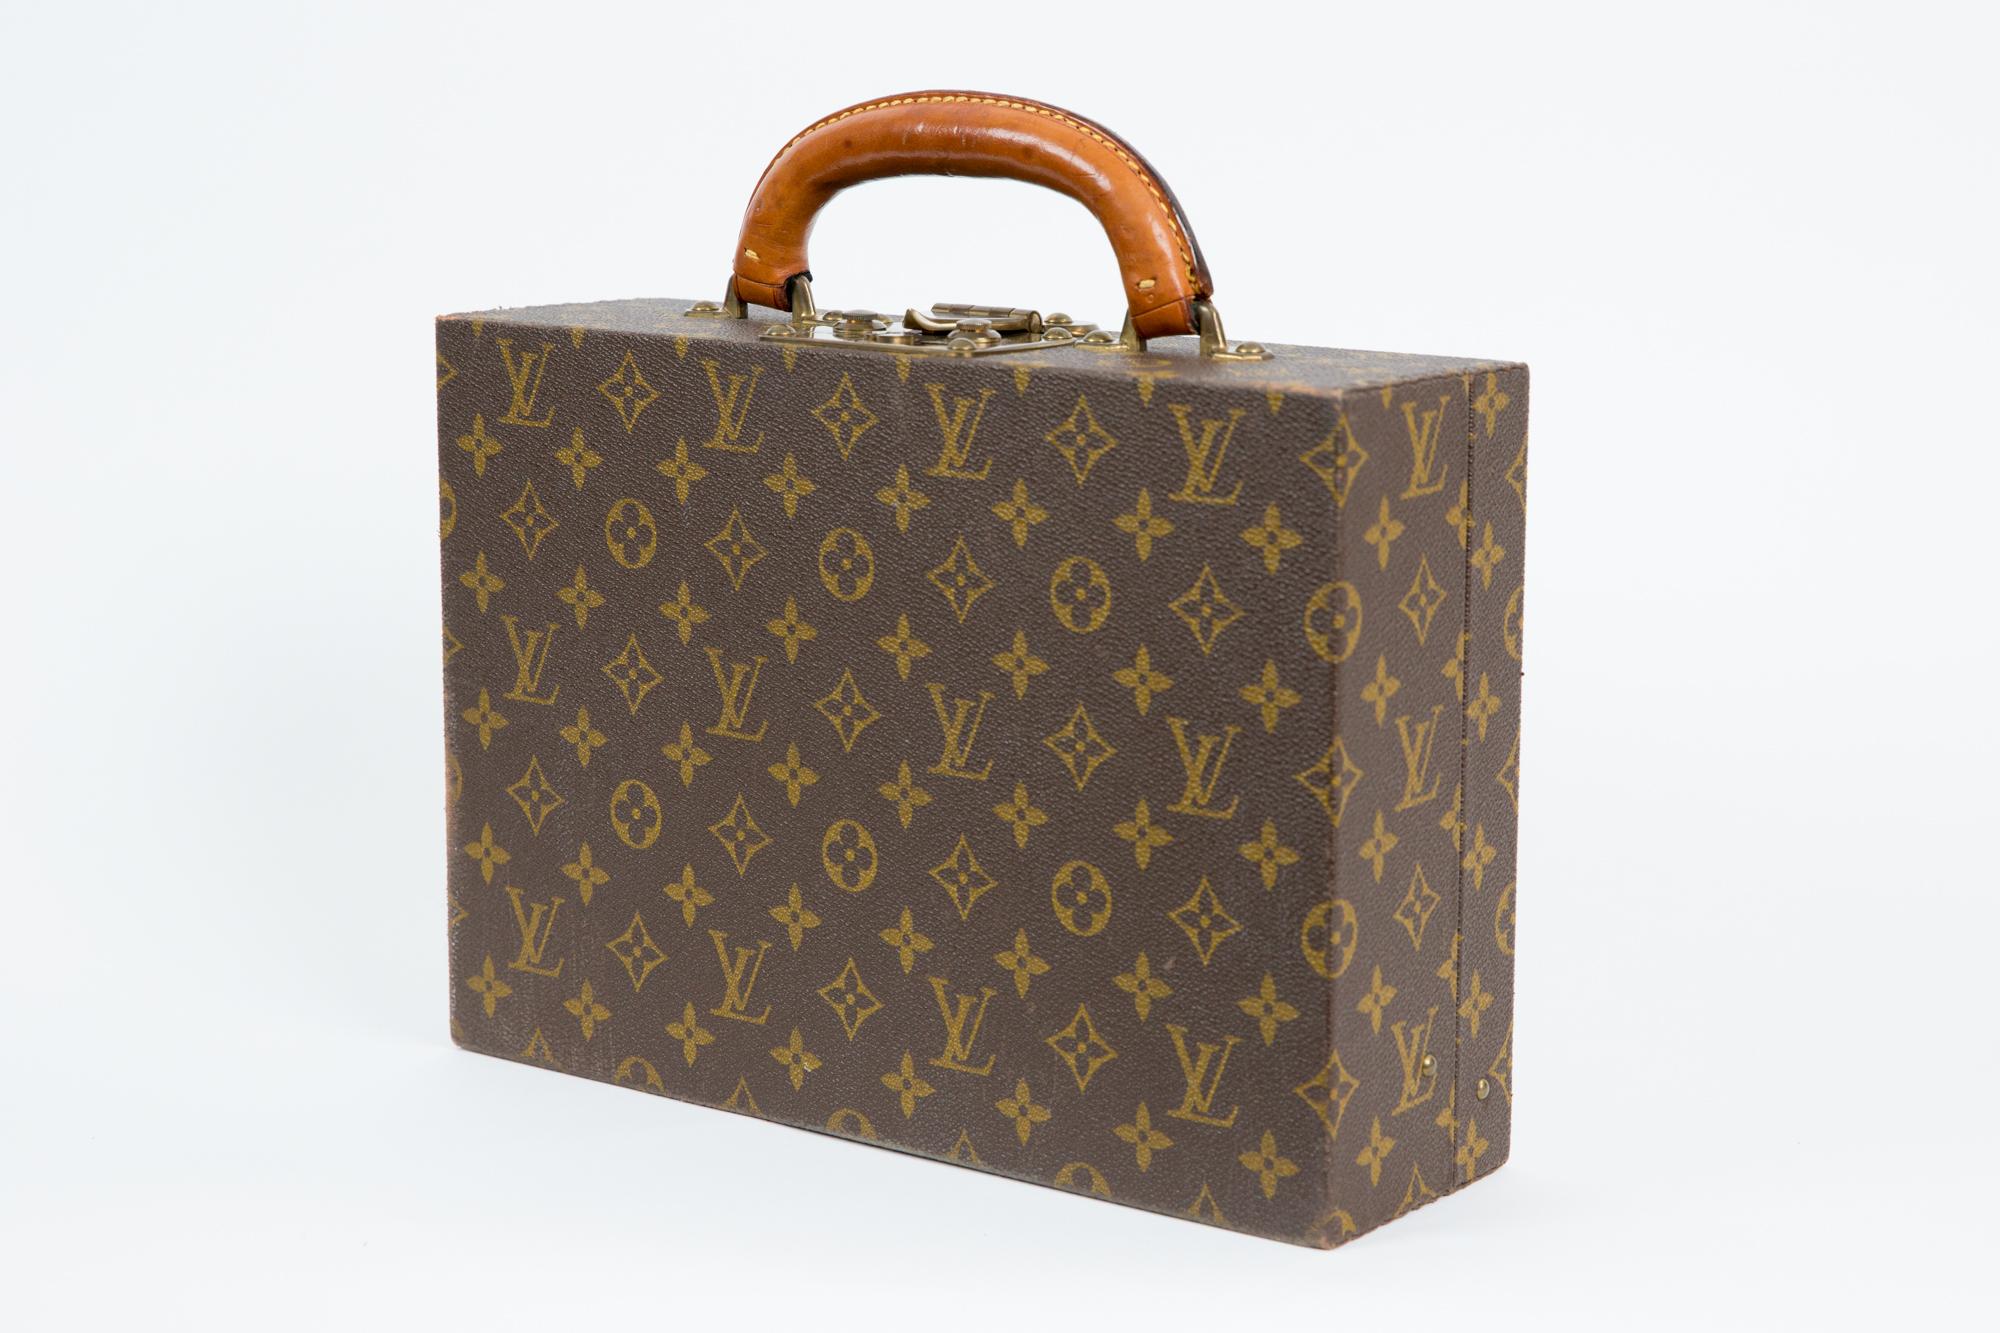 Louis Vuitton brown Monogram Jewell case luggage featuring two Louis Vuitton keys numbered ( n°128092), a leather handle, inside brown velvet and leather compartments, brass hardware. 
Inside Louis Vuitton stamp numbered 899485.
In excellent vintage